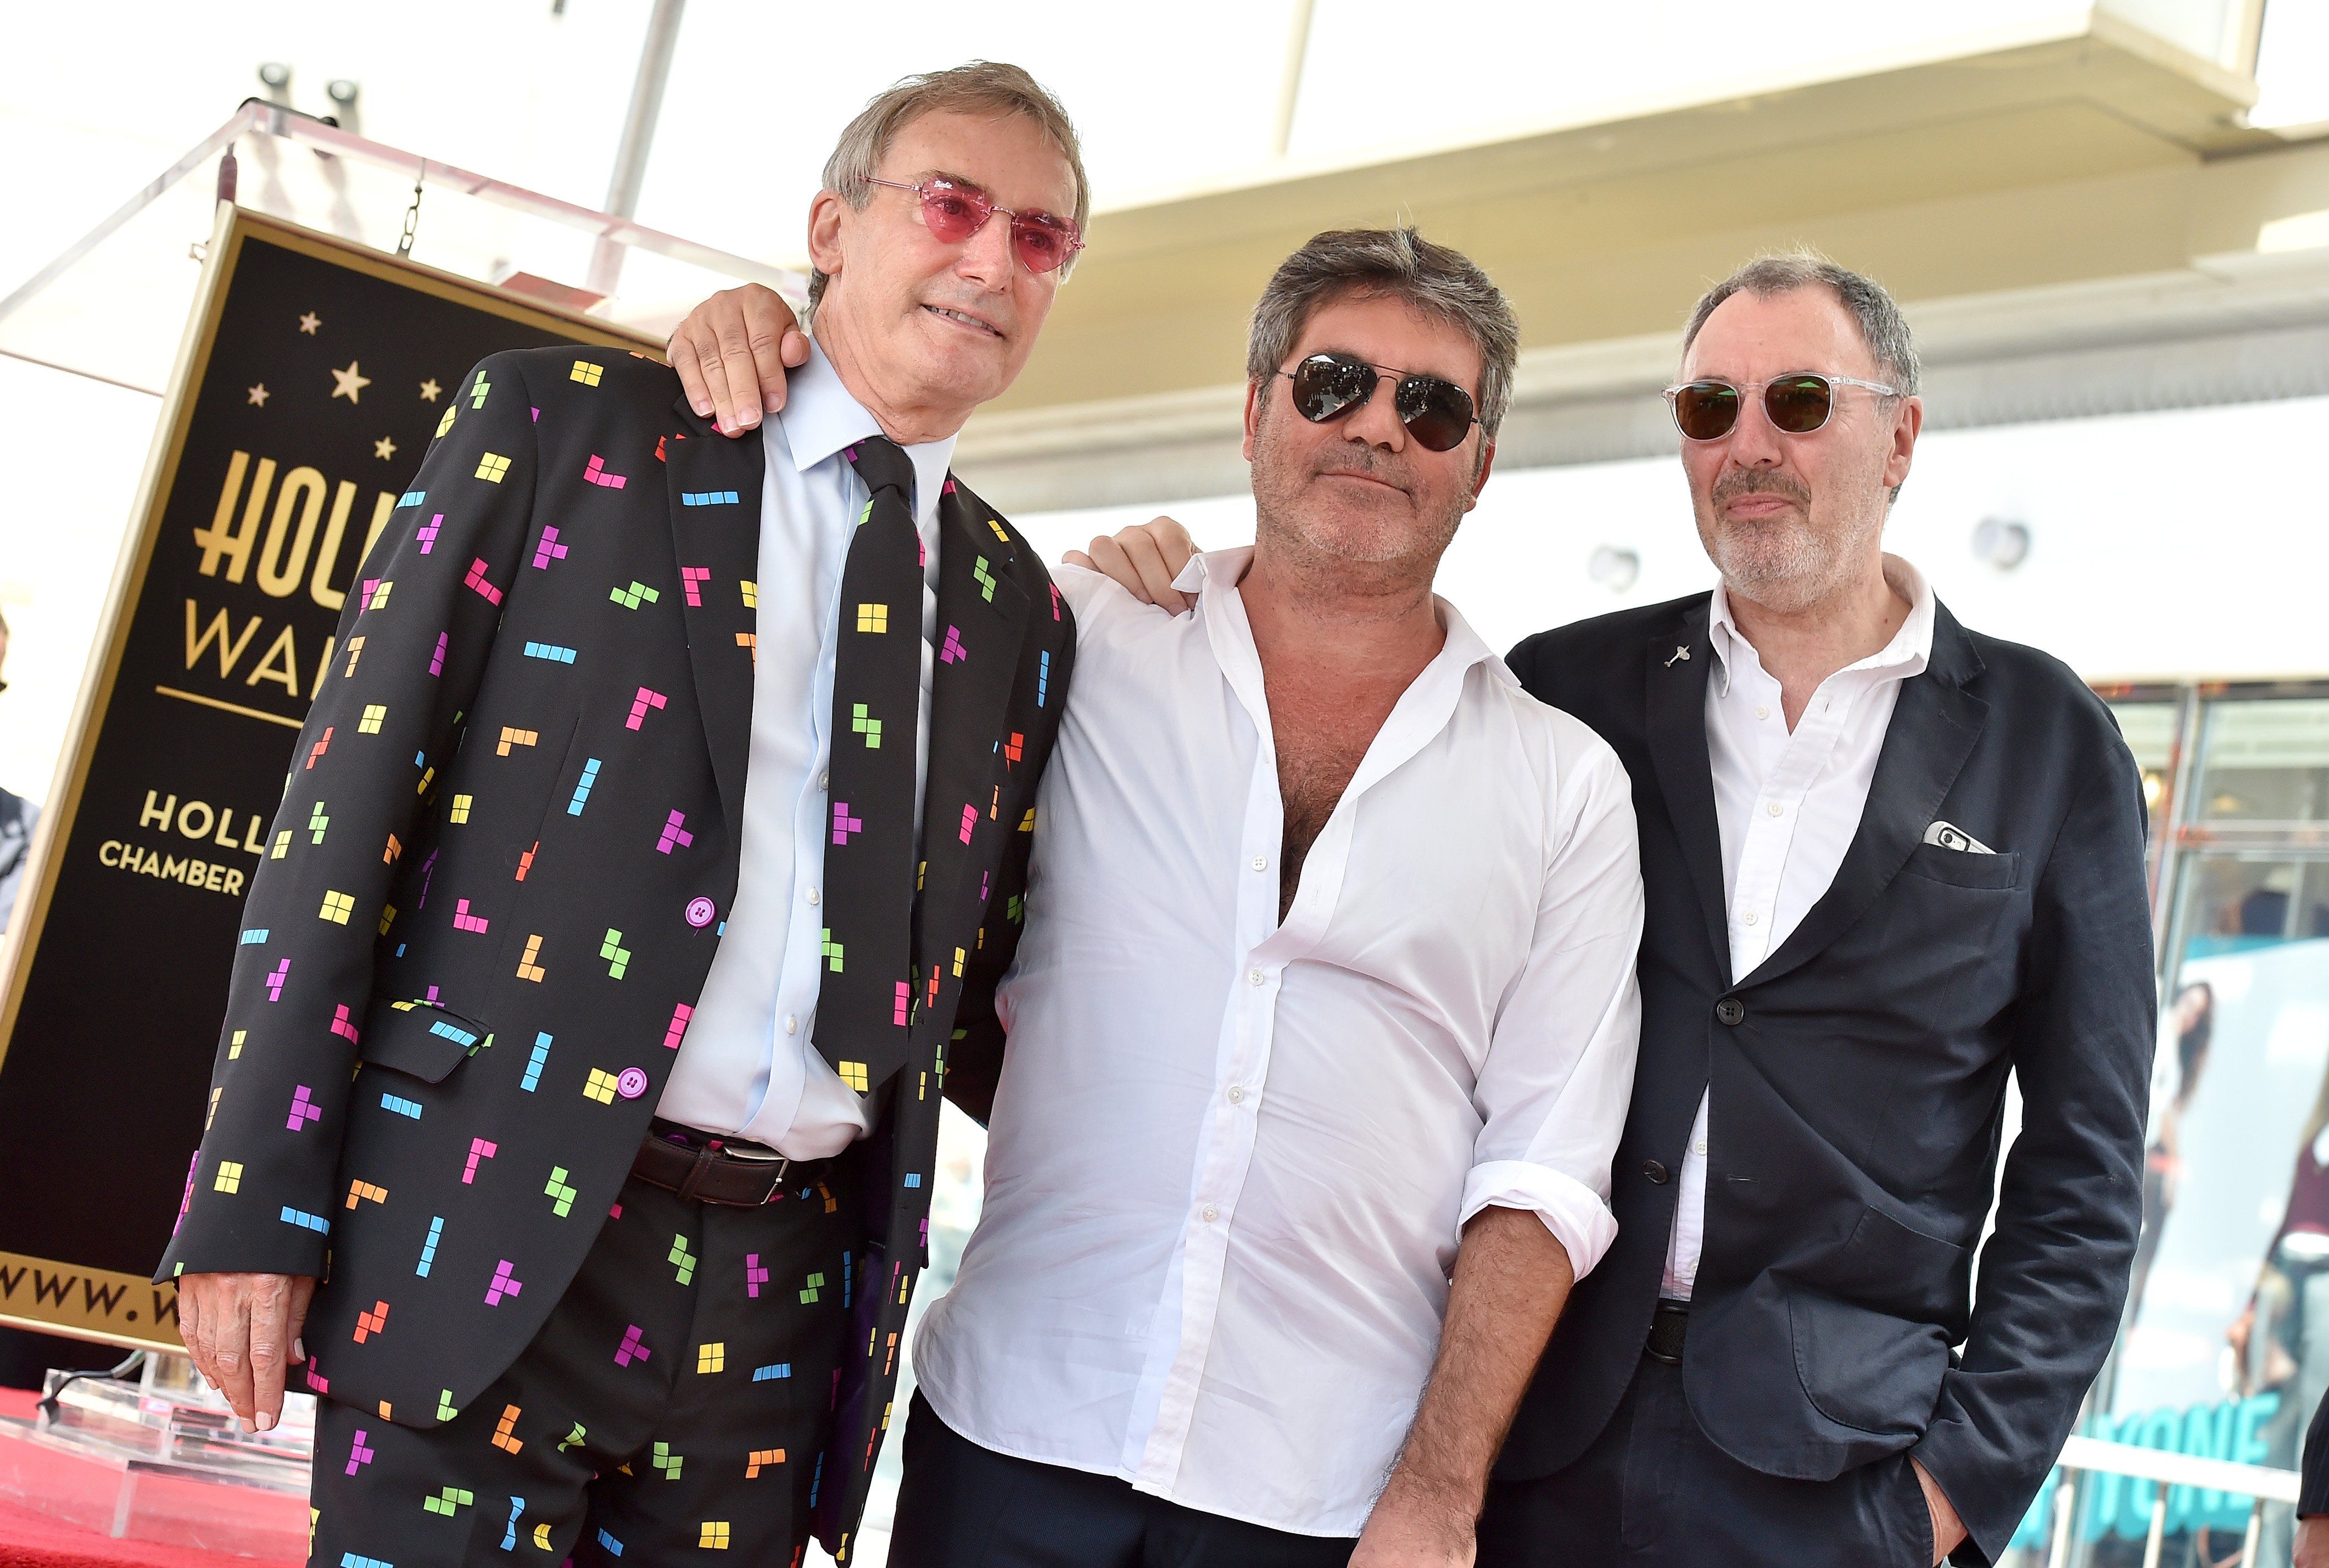  Simon Cowell with brothers Nicholas Cowell and Tony Cowell at the ceremony honoring him with a star on the Hollywood Walk of Fame in 2018 in Hollywood. | Source: Getty Images